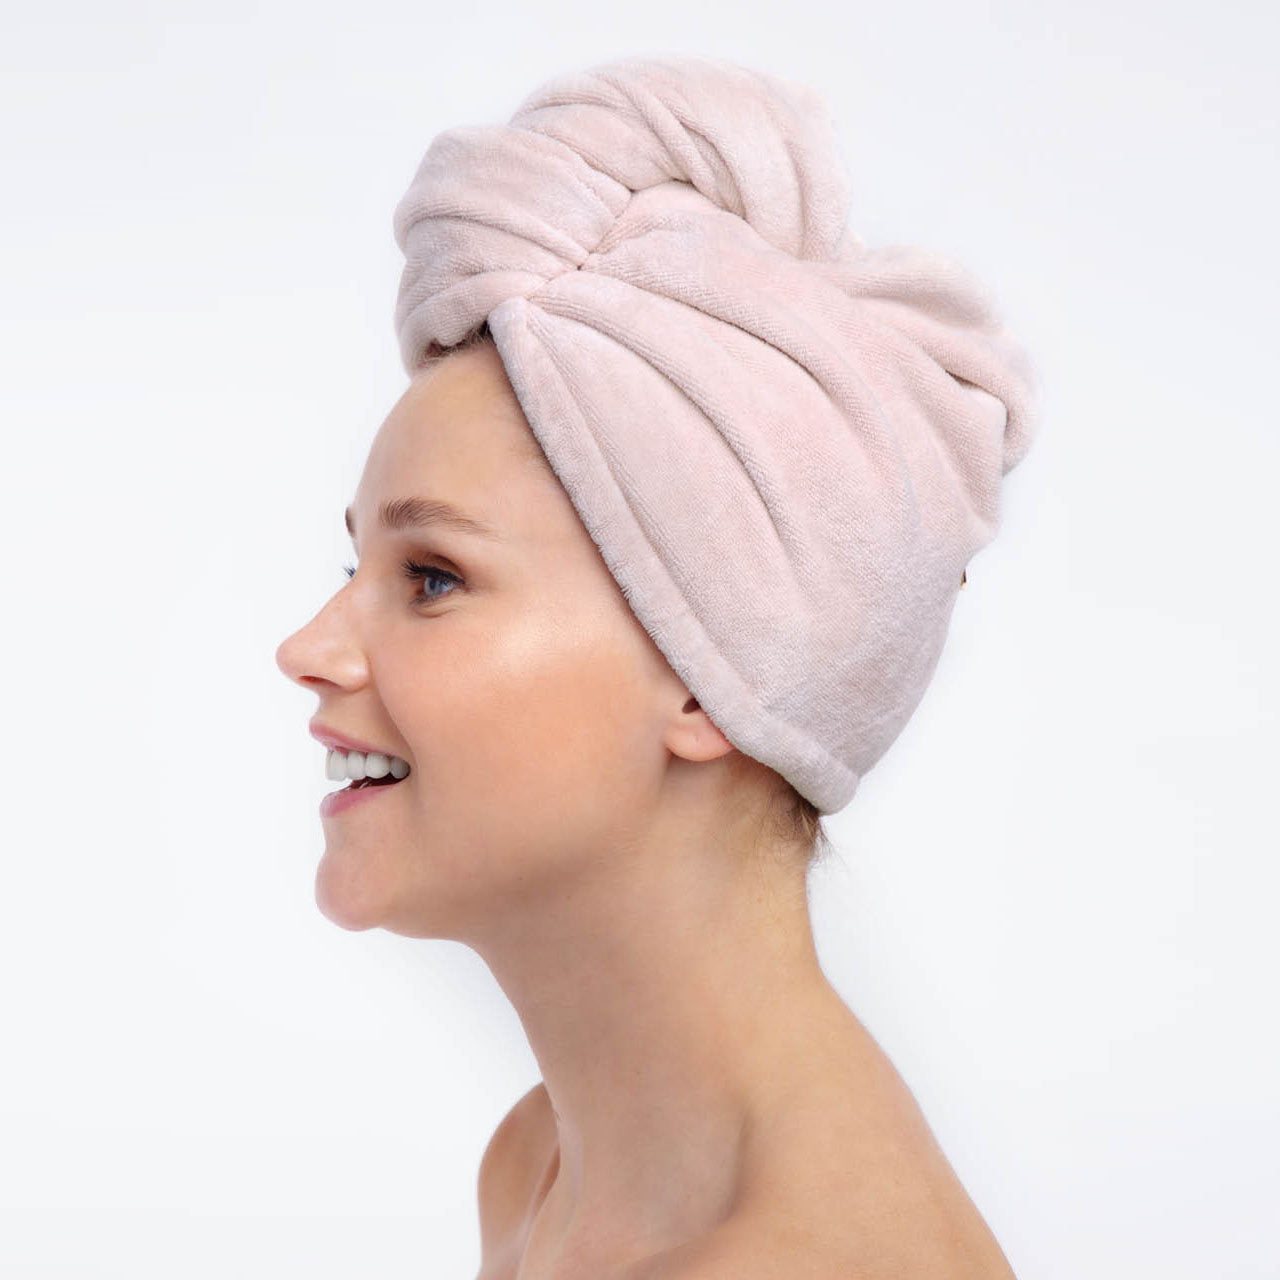 Quick-Drying Hair Towel